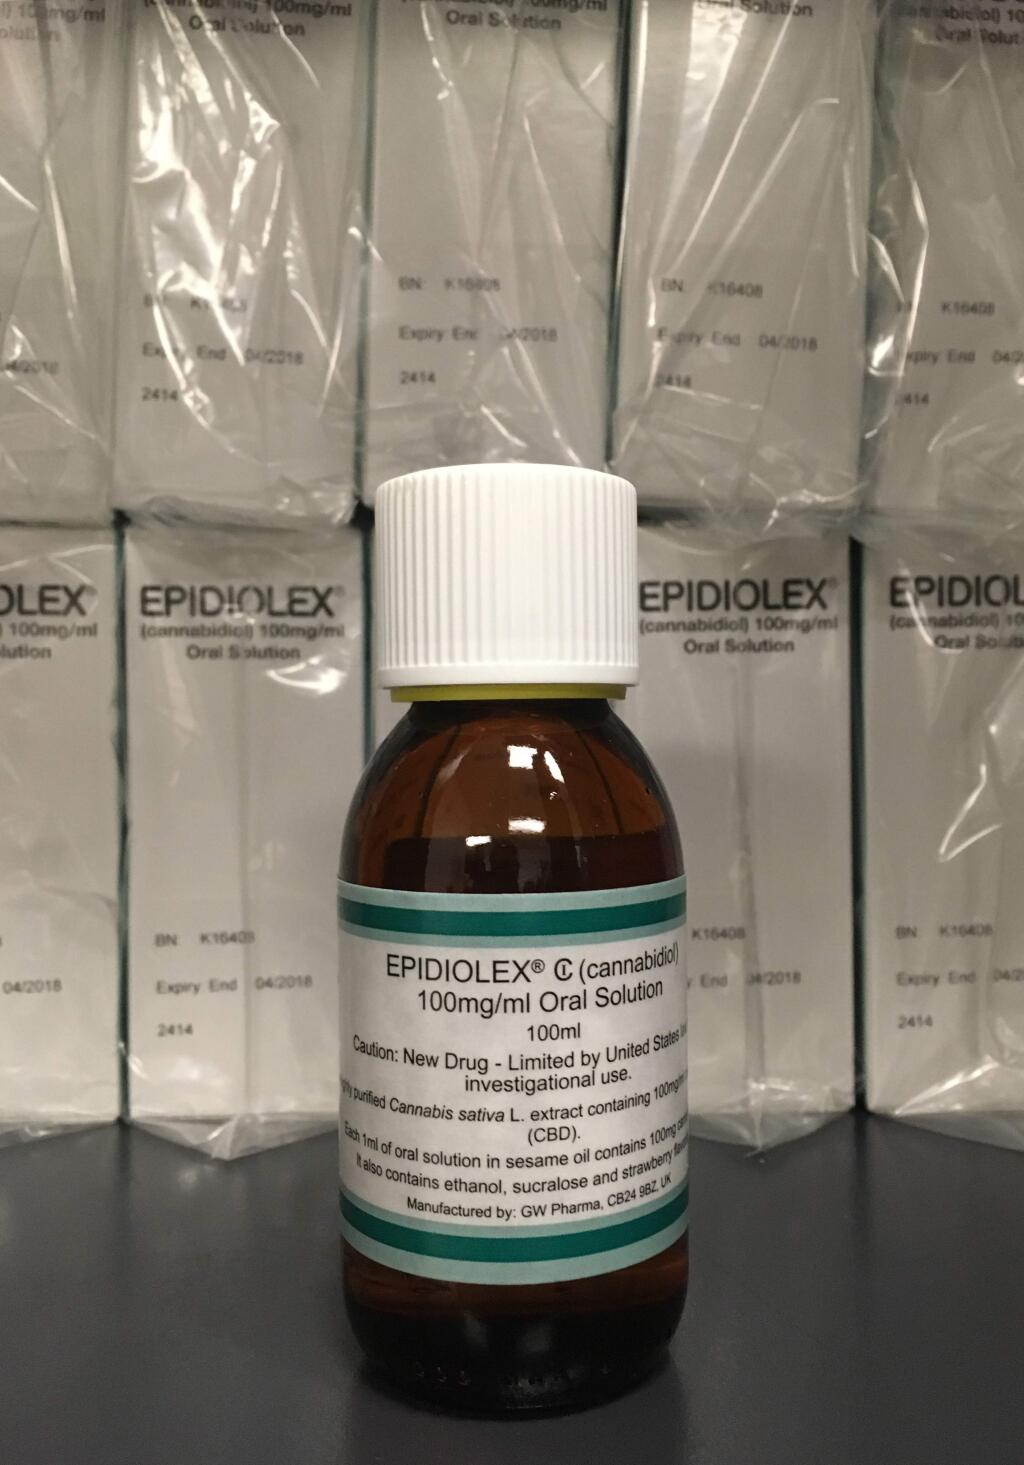 This Tuesday, May 23, 2017, photo shows GW Pharmaceuticals' Epidiolex, a medicine made from marijuana, but without TCH, in New York. According to a study published Wednesday by the New England Journal of Medicine the medicine cut seizures in kids with a severe form of epilepsy, which strengthens the case for more research into pot's possible health benefits. (AP Photo/Kathy Young)